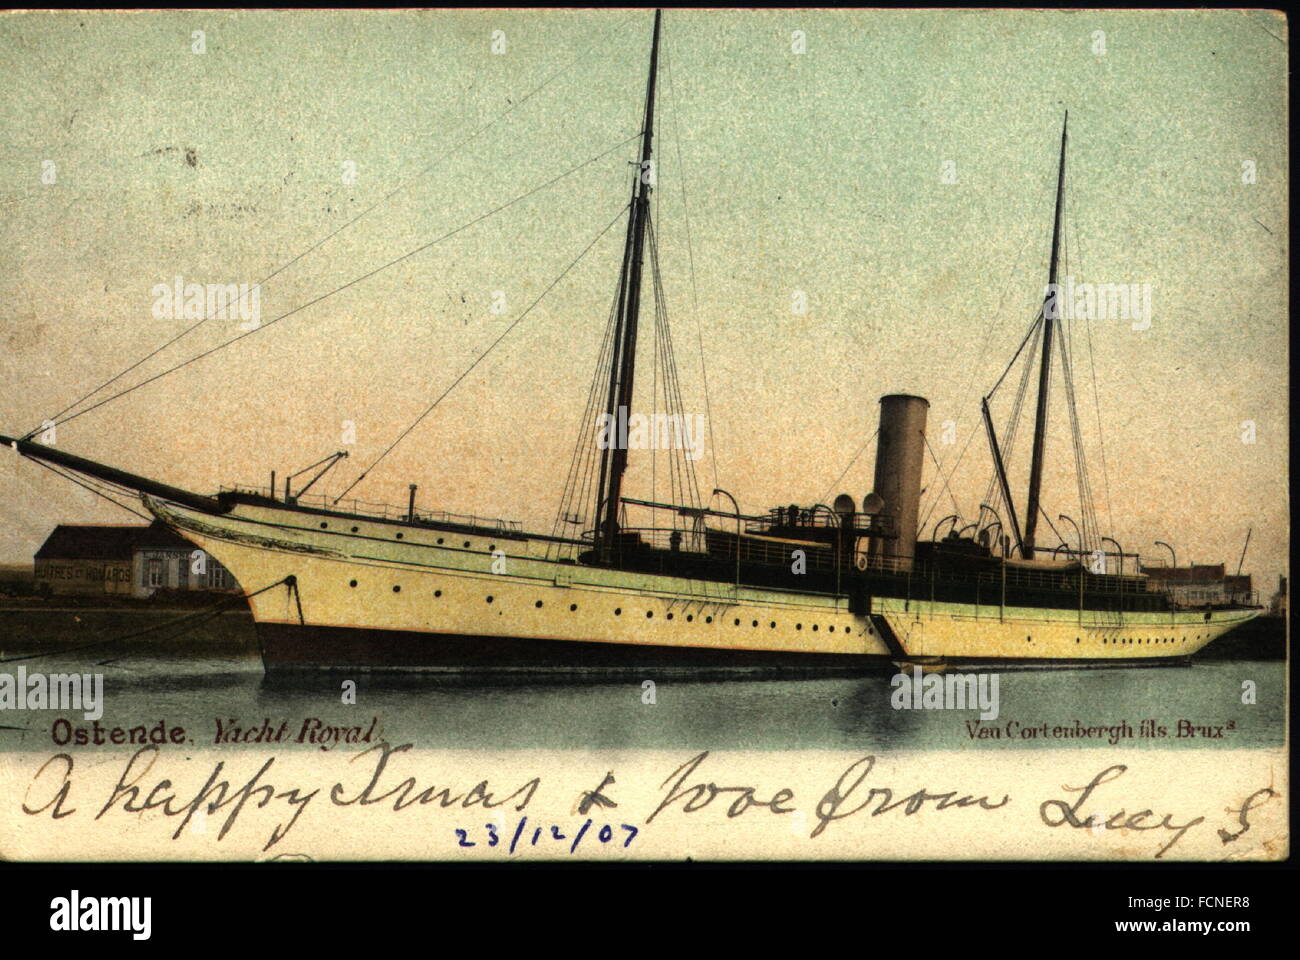 AJAXNETPHOTO. 1907. OSTENDE, BELGIUM. - ROYAL YACHT - KING LEOPOLD II'S STEAM YACHT ALBERTA DEPICTED IN A POSTCARD DATED 1907. THE YACHT WAS DESIGNED BY GEORGE LENNOX WATSON, BUILT IN SCOTLAND BY AILSA SHIPBUILDING CO FOR PHILADELPHIA BANKER DREXEL AND NAMED MARGARITA.     PHOTO:AJAX VINTAGE PICTURE LIBRARY  REF:ROYAL YACHTS BEL 1907. Stock Photo